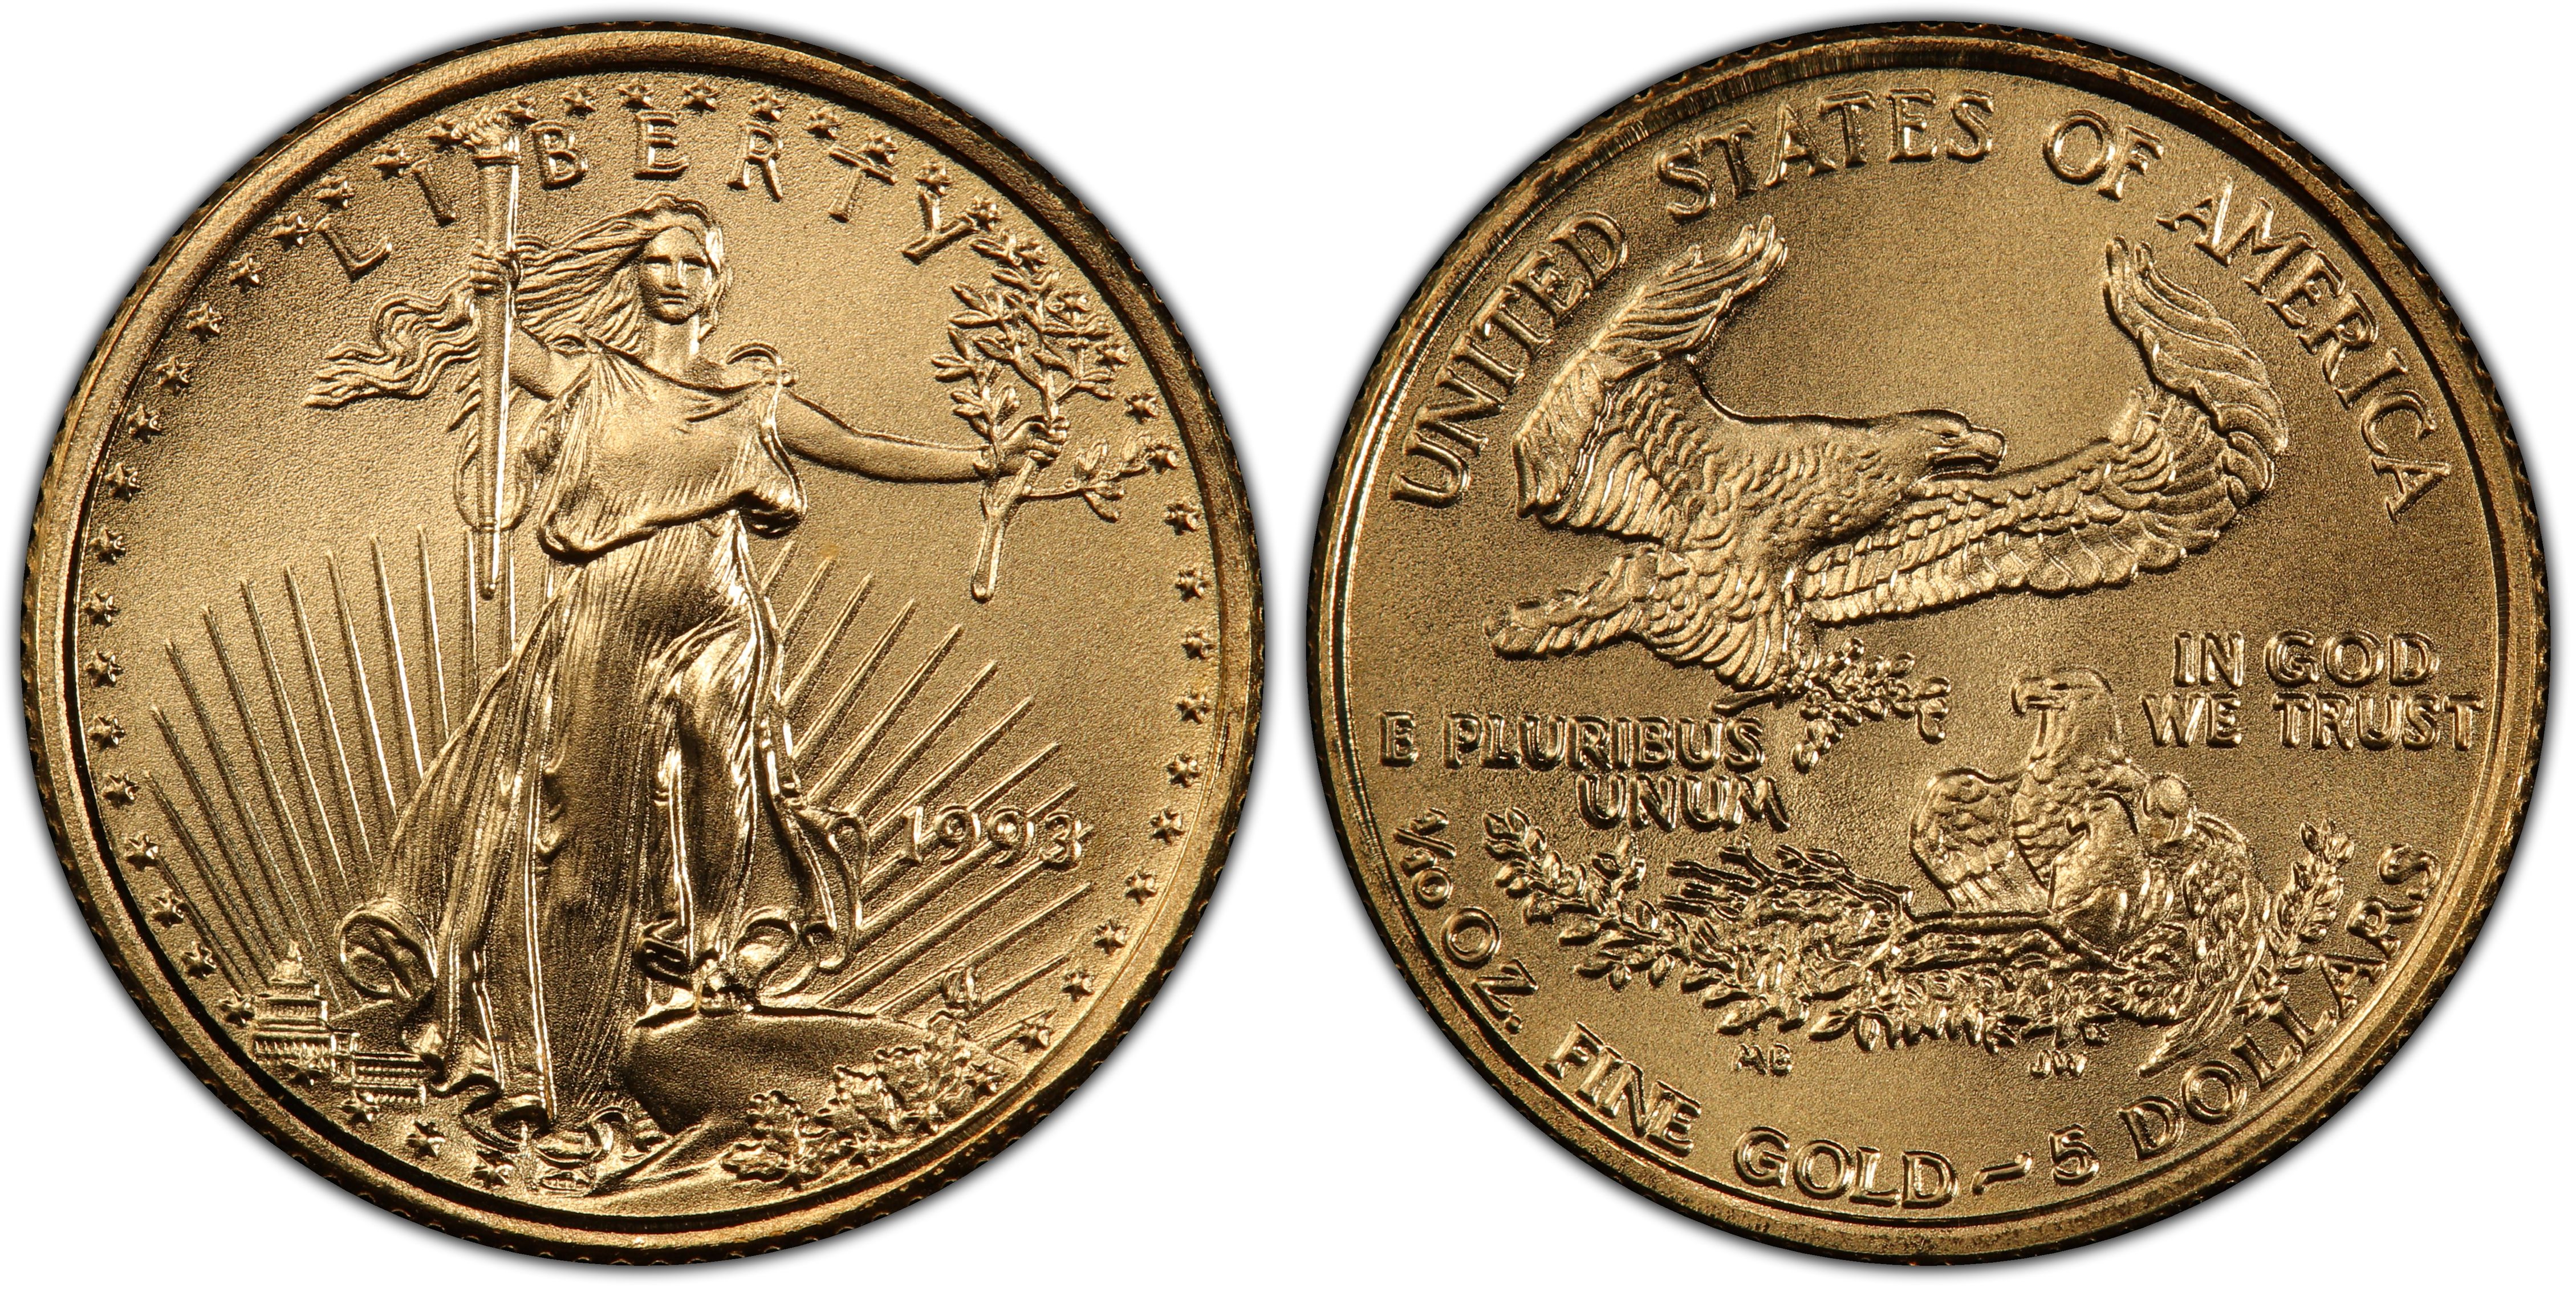 1993 $5 Gold Eagle (Regular Strike) Gold Eagles - PCGS CoinFacts